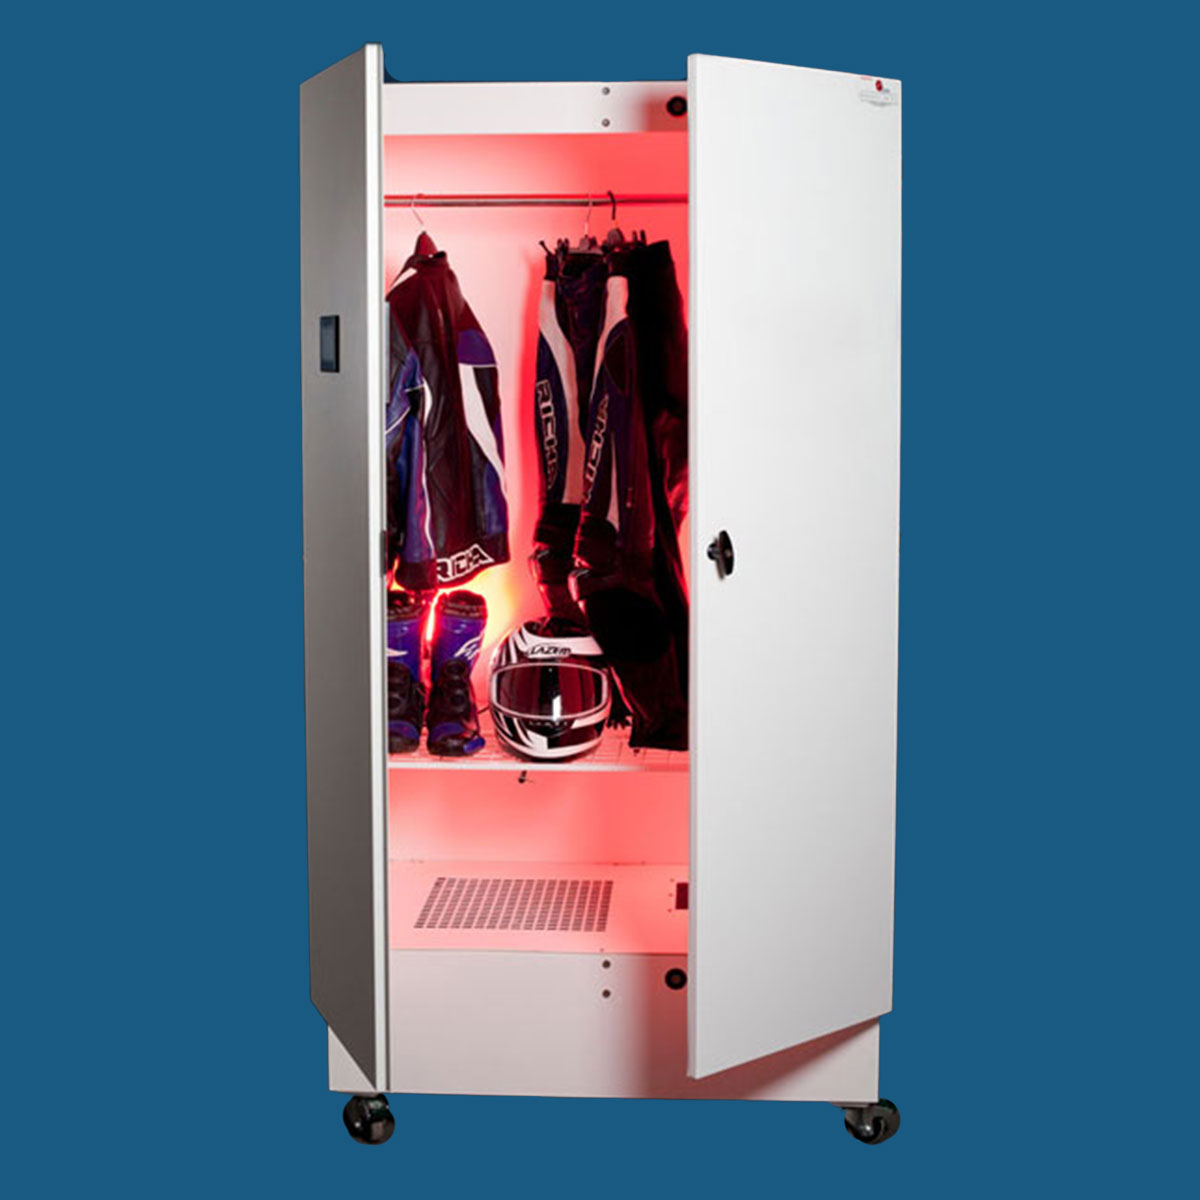 White Ozone cabinet with open doors showing pink lighting and motorcycle gear inside the unit.